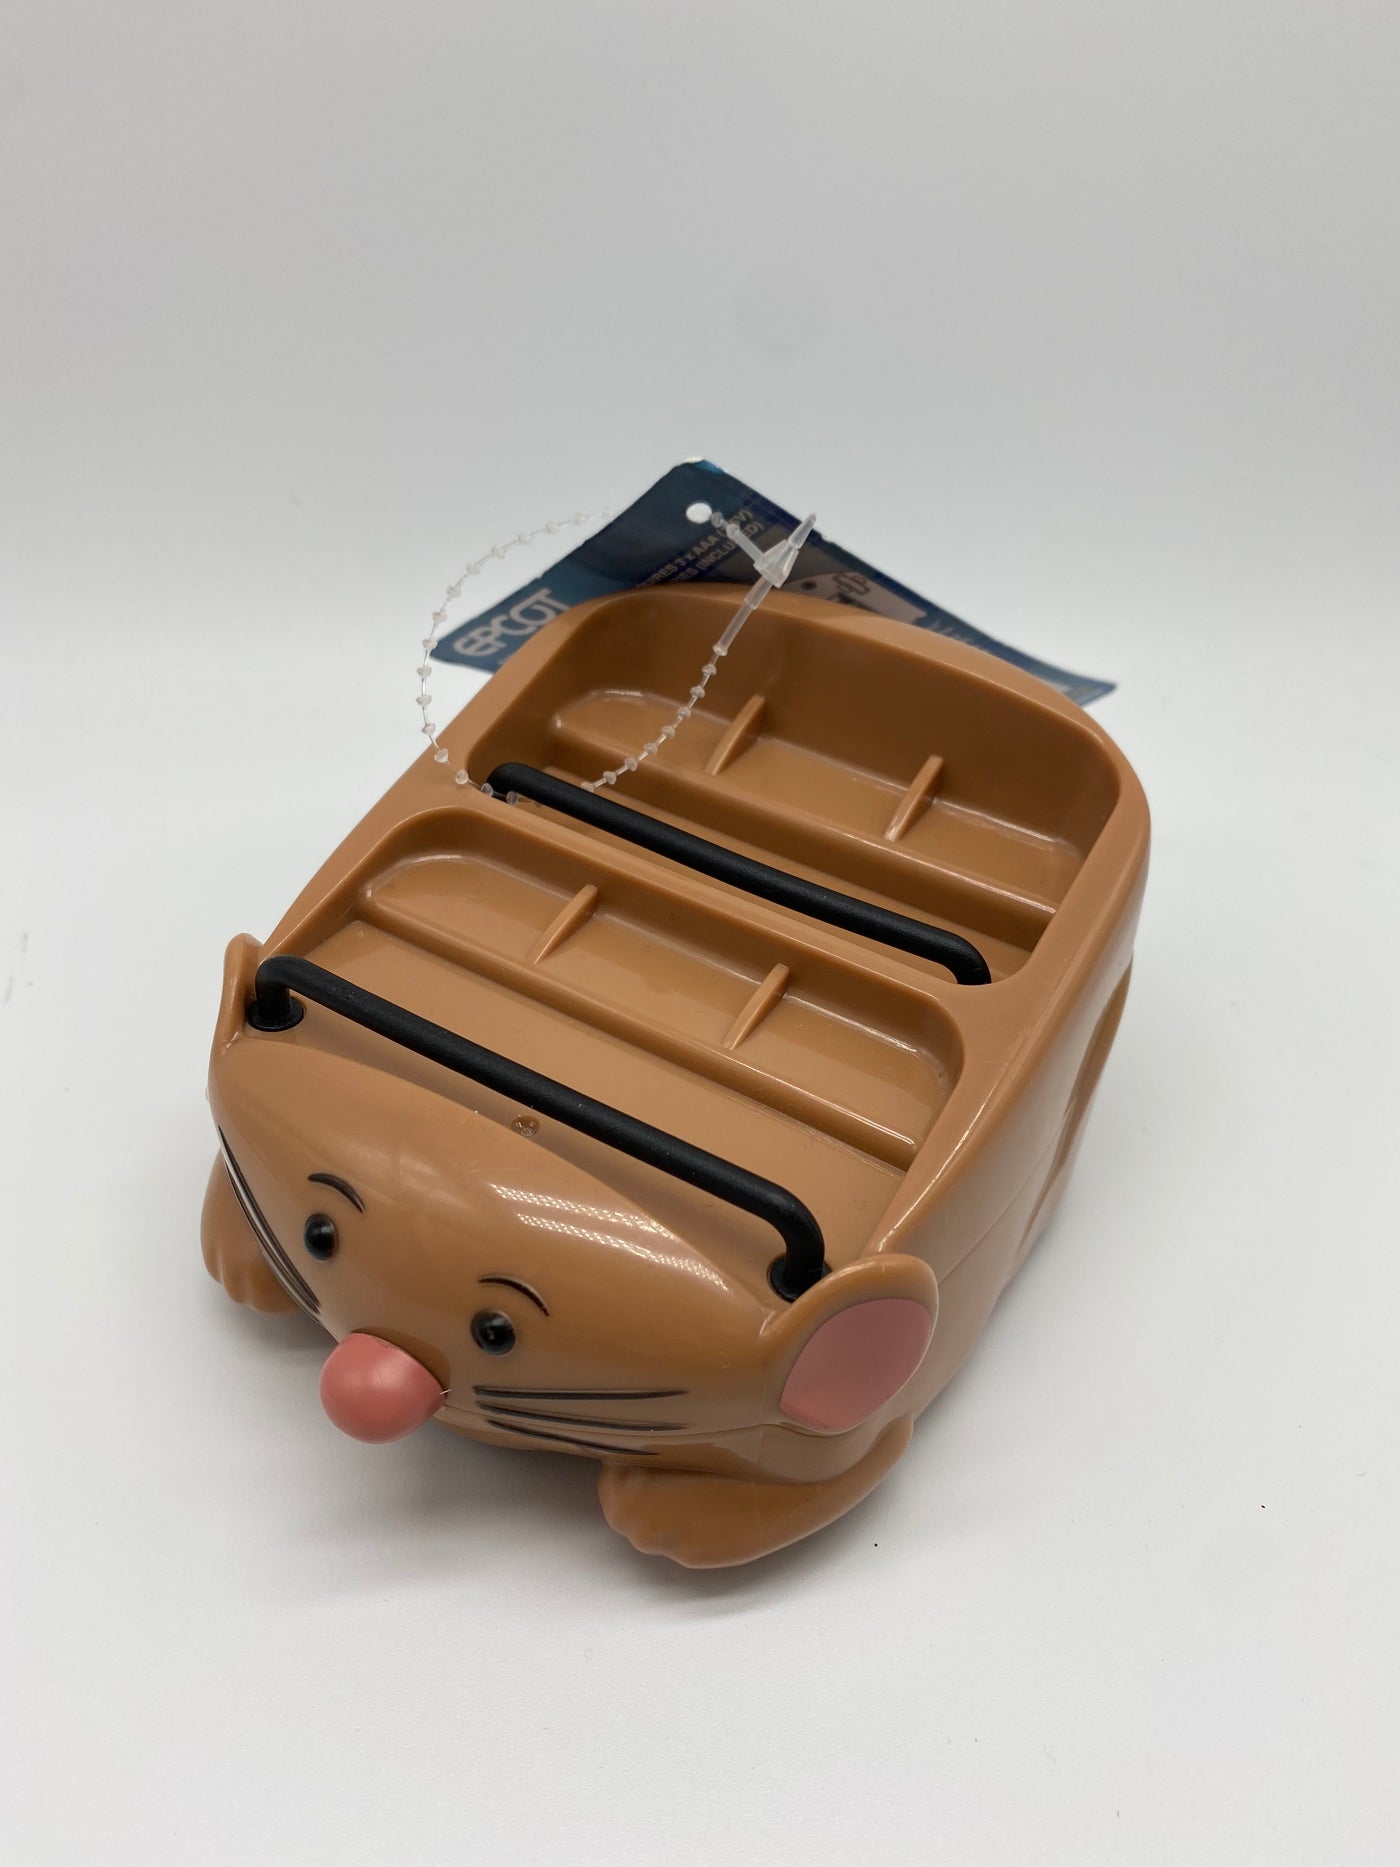 Disney Parks Chef Remy's Ratatouille Emile Adventure Bump and Go Vehicle Toy New